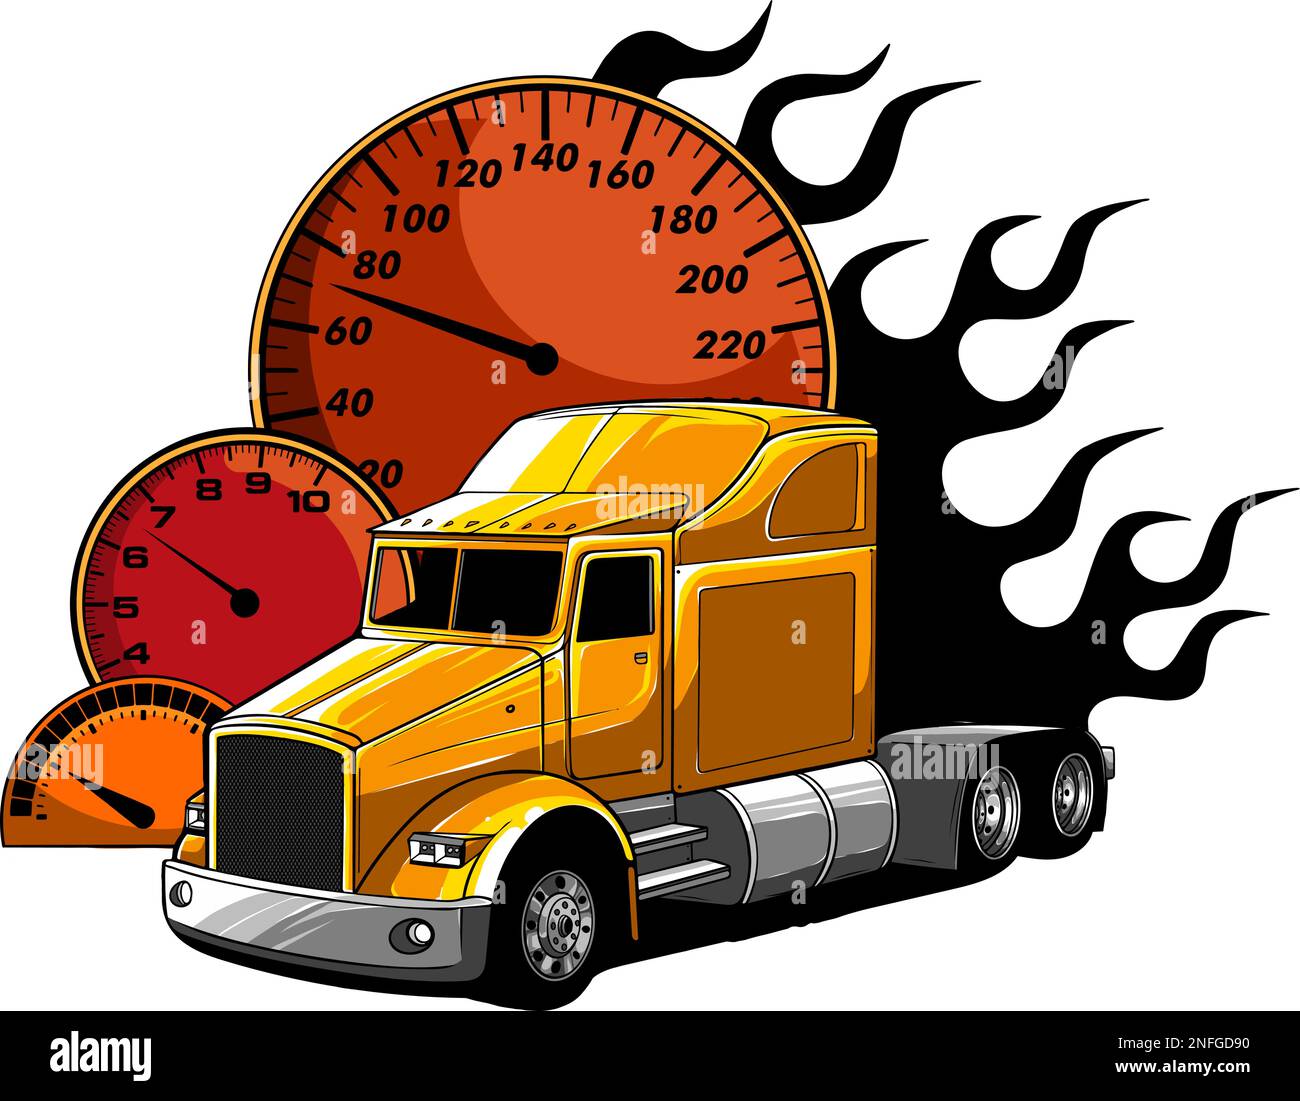 vector illustration of truck with odometer and flames Stock Vector